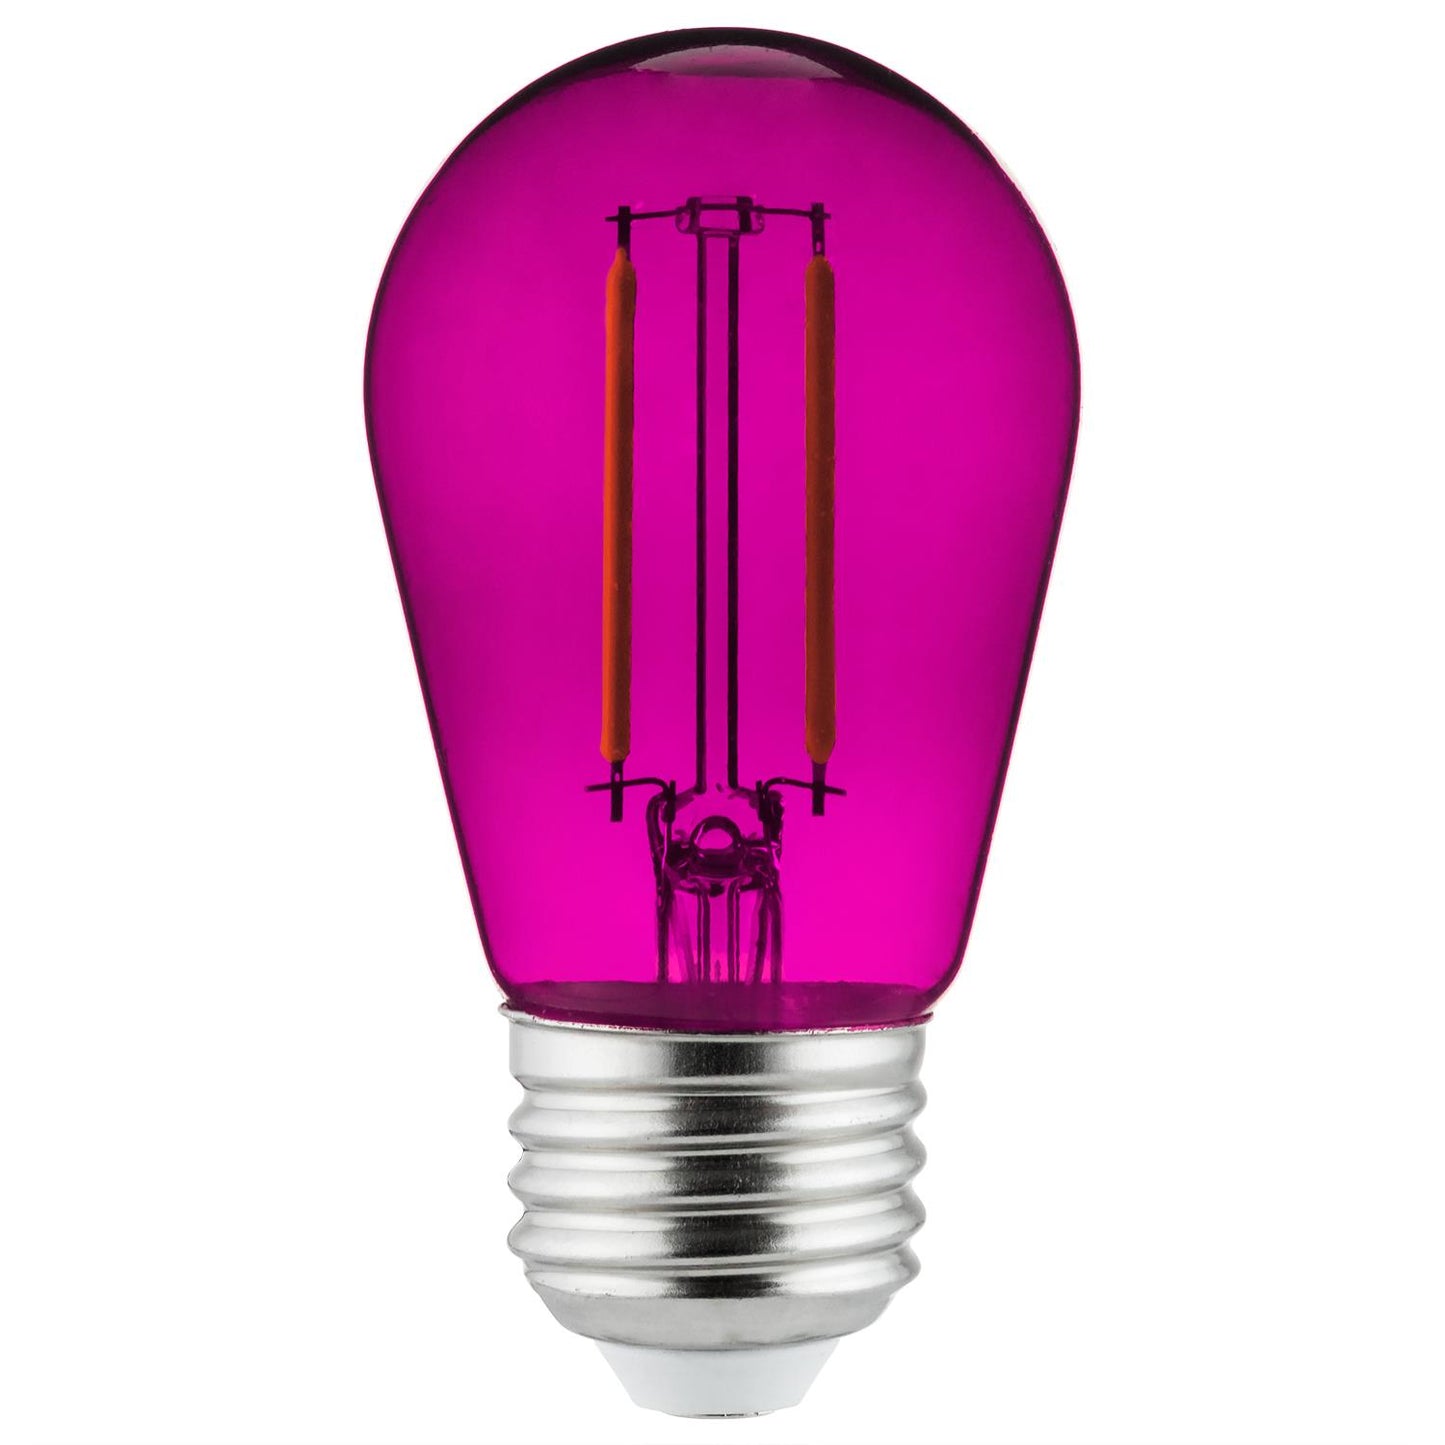 Sunlite LED Transparent Purple Colored S14 Medium Base (E26) Bulb - Parties, Decorative, and Holiday 15,000 Hours Average Life